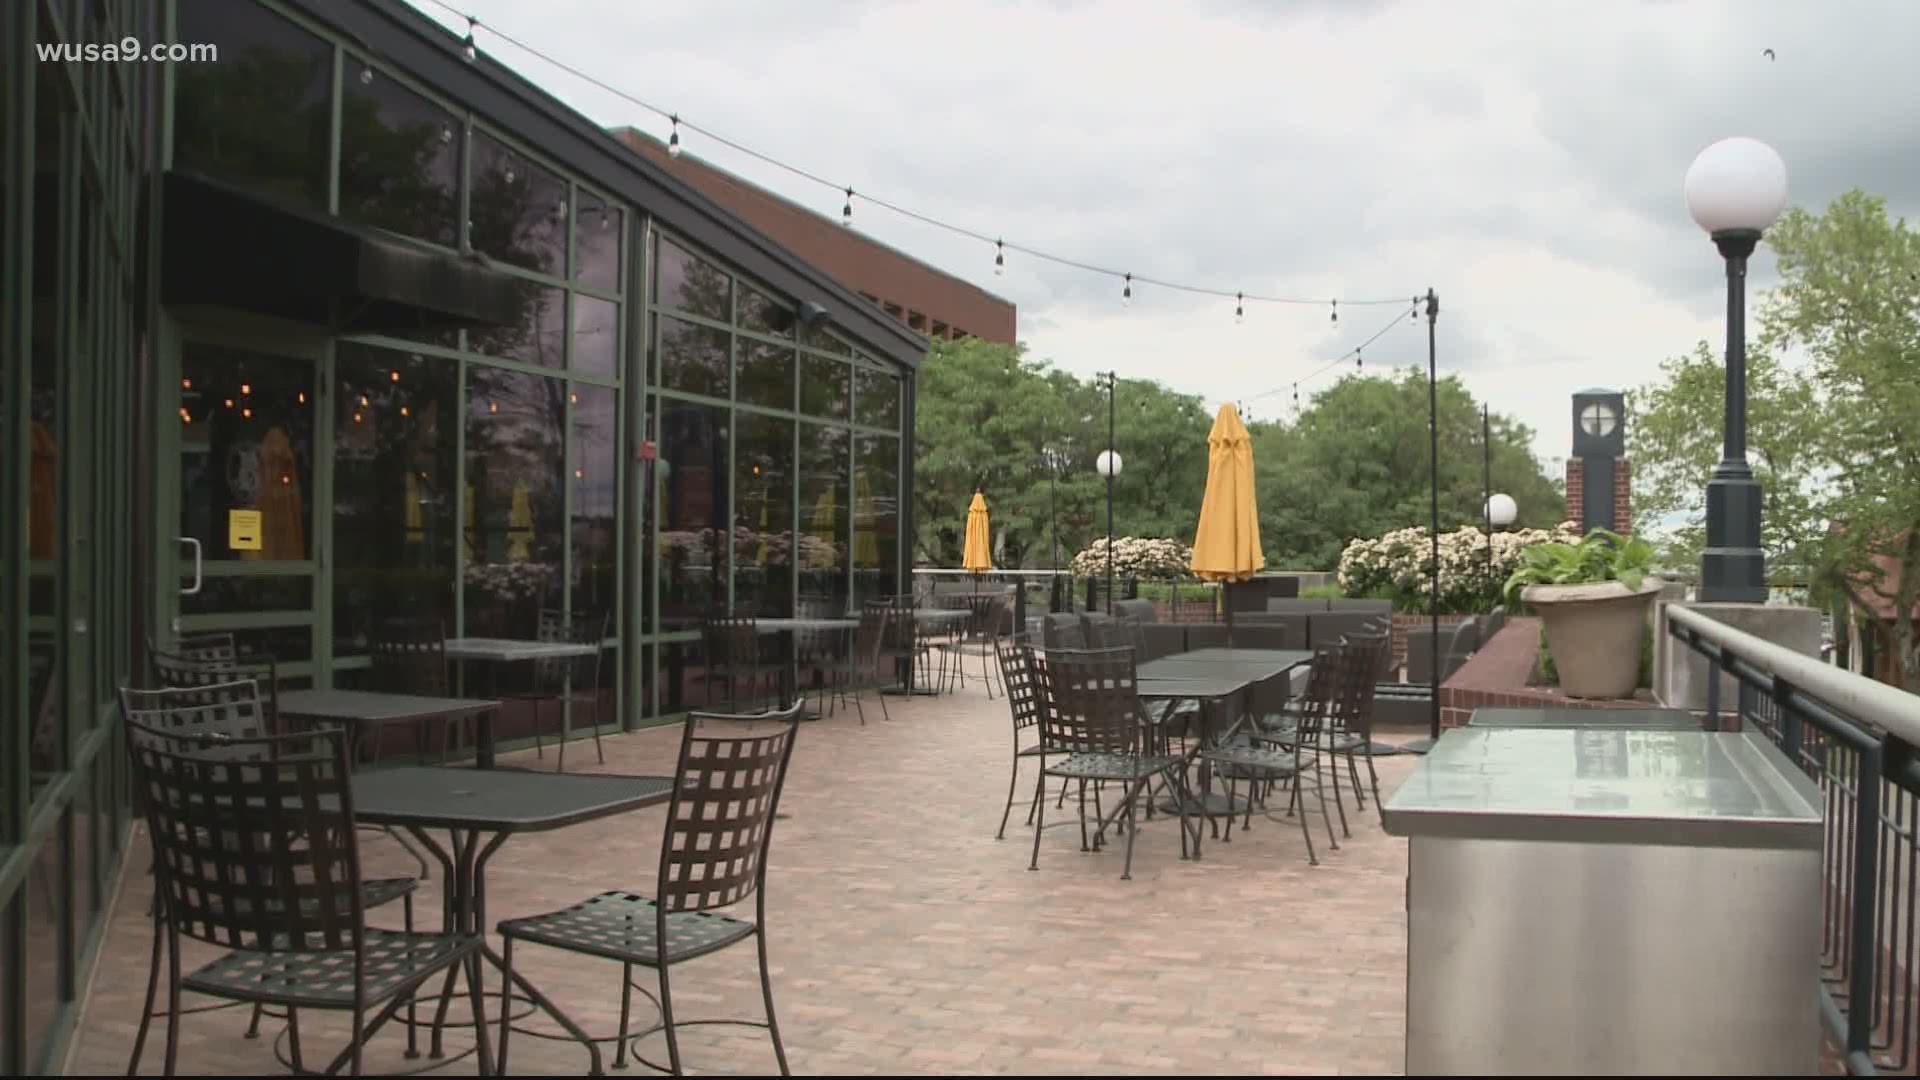 In Arlington, they're going to try temporary permits for outdoor seating on sidewalks, and some folks in Bethesda are pushing for communal outdoor seats.